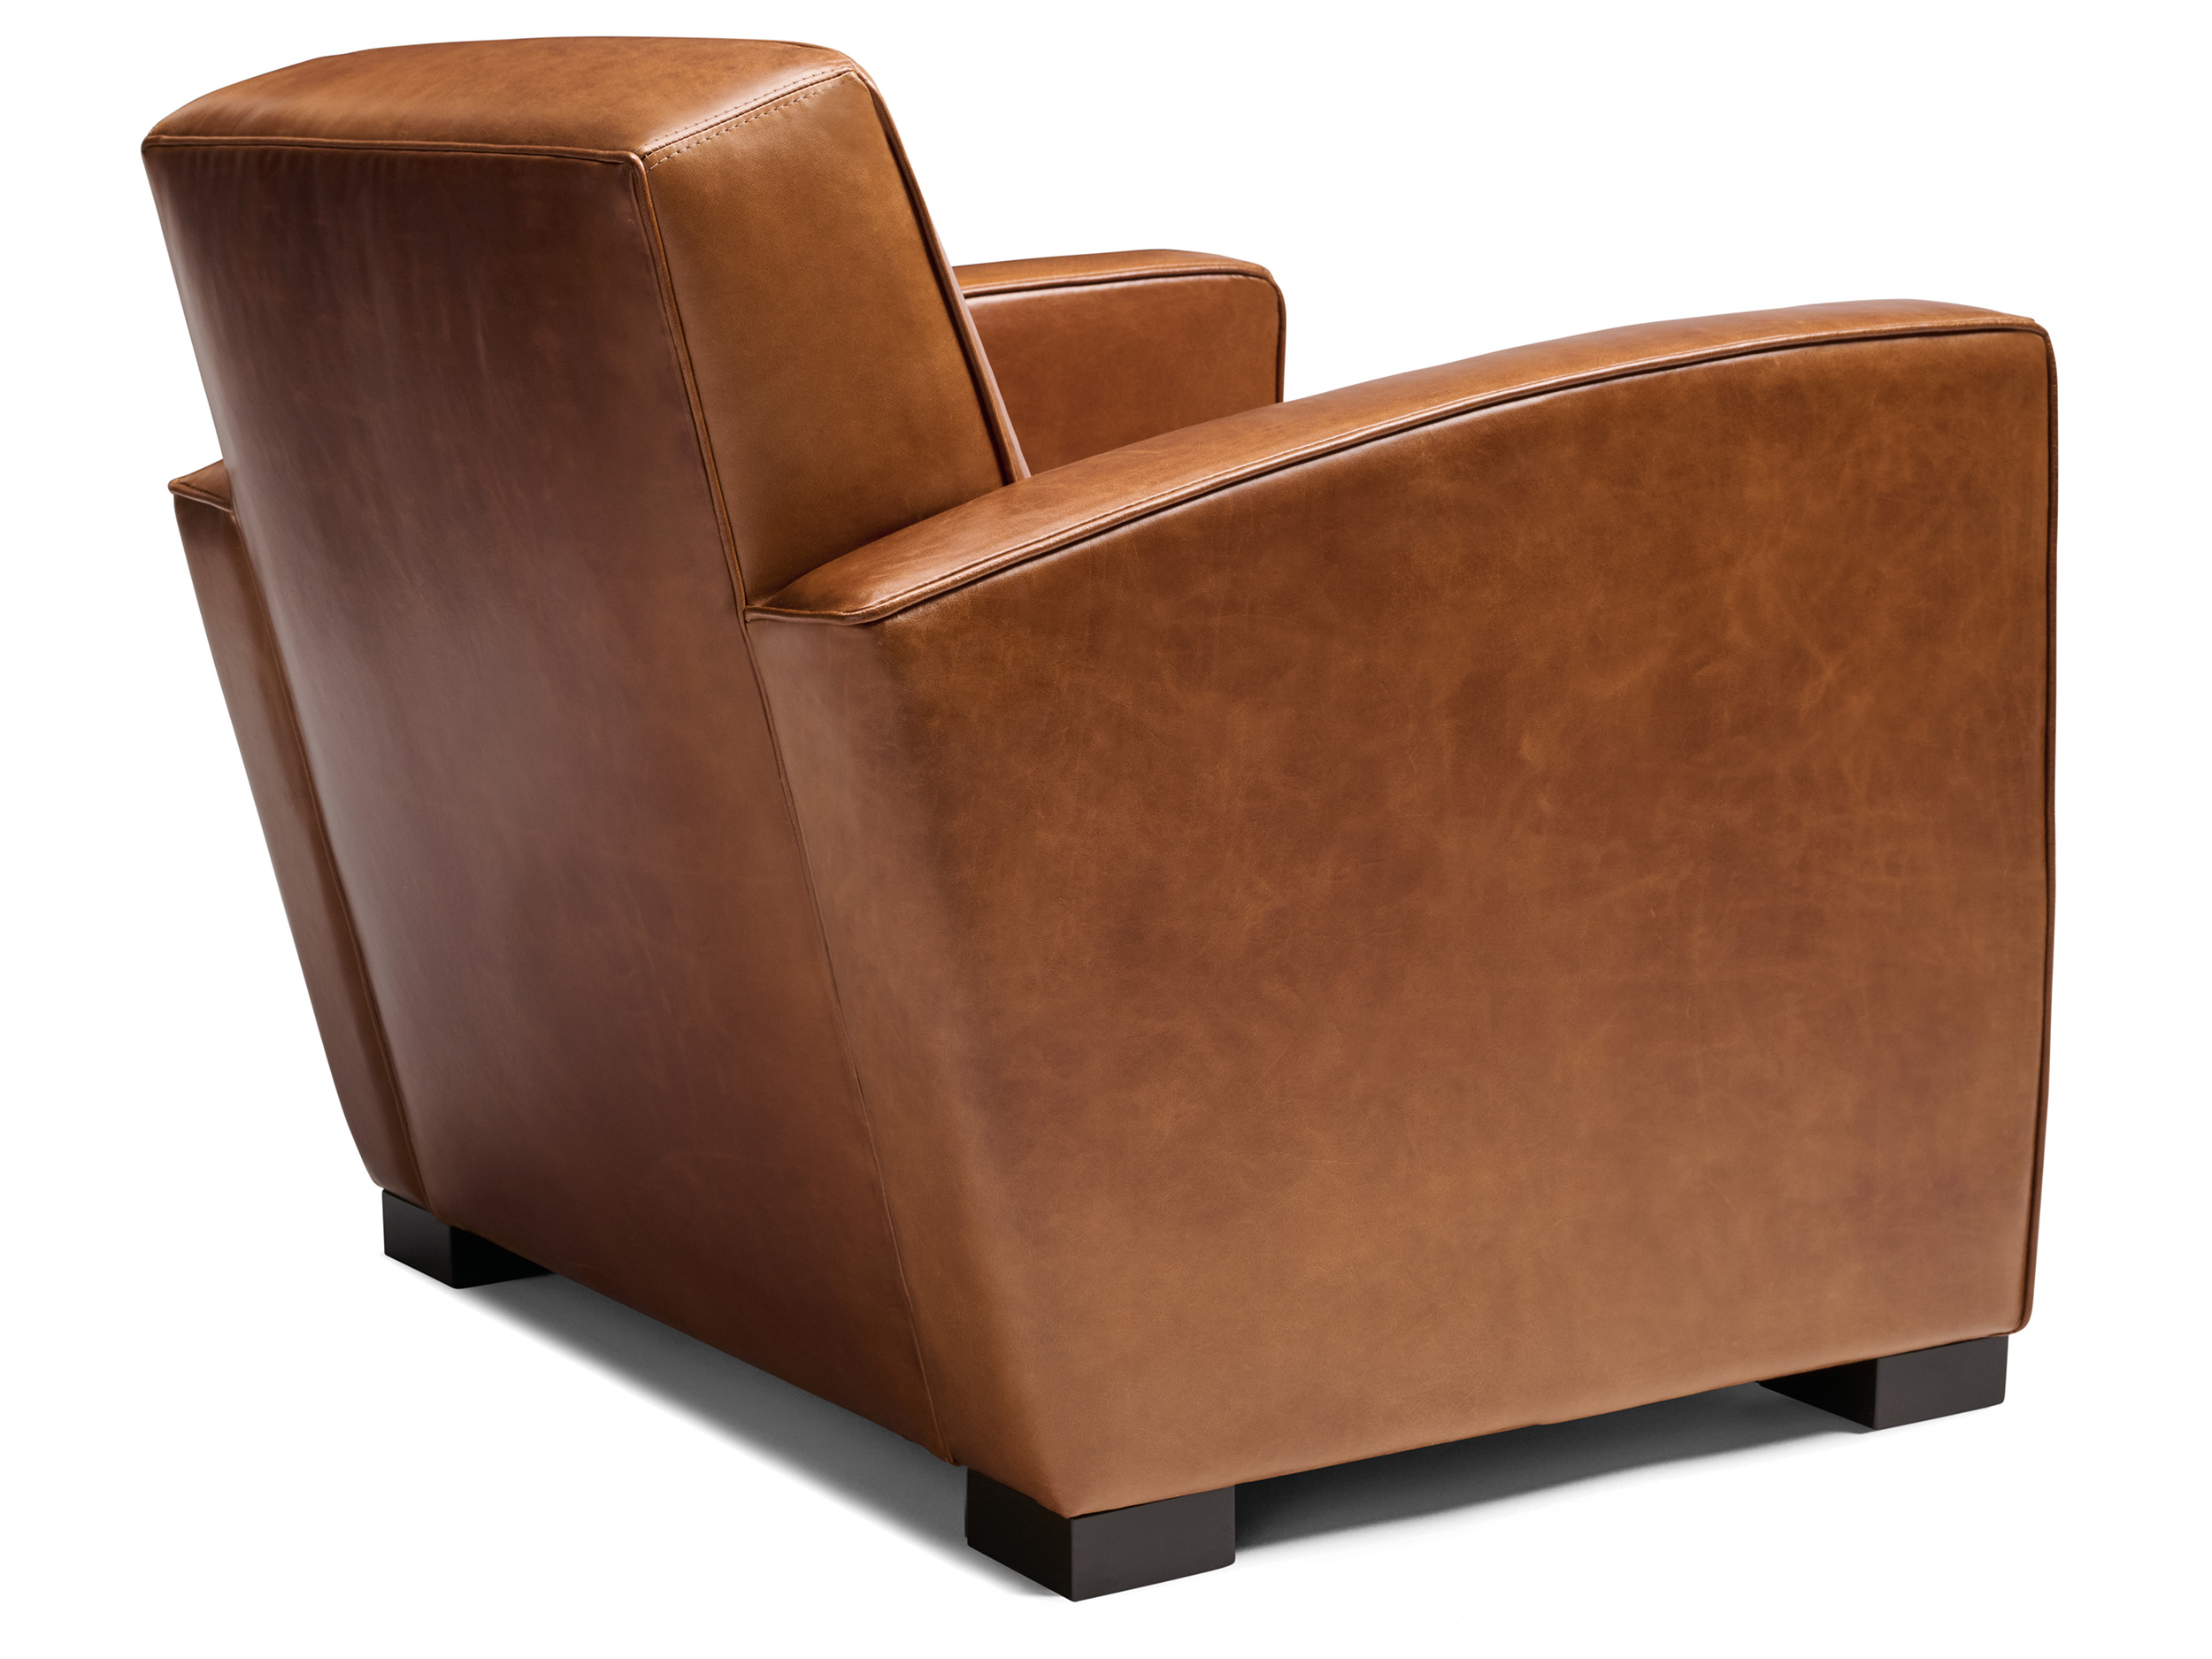 In stock - Atlas Leather Chair in Mont Blanc Caramel Leather - One only - rear angle angle